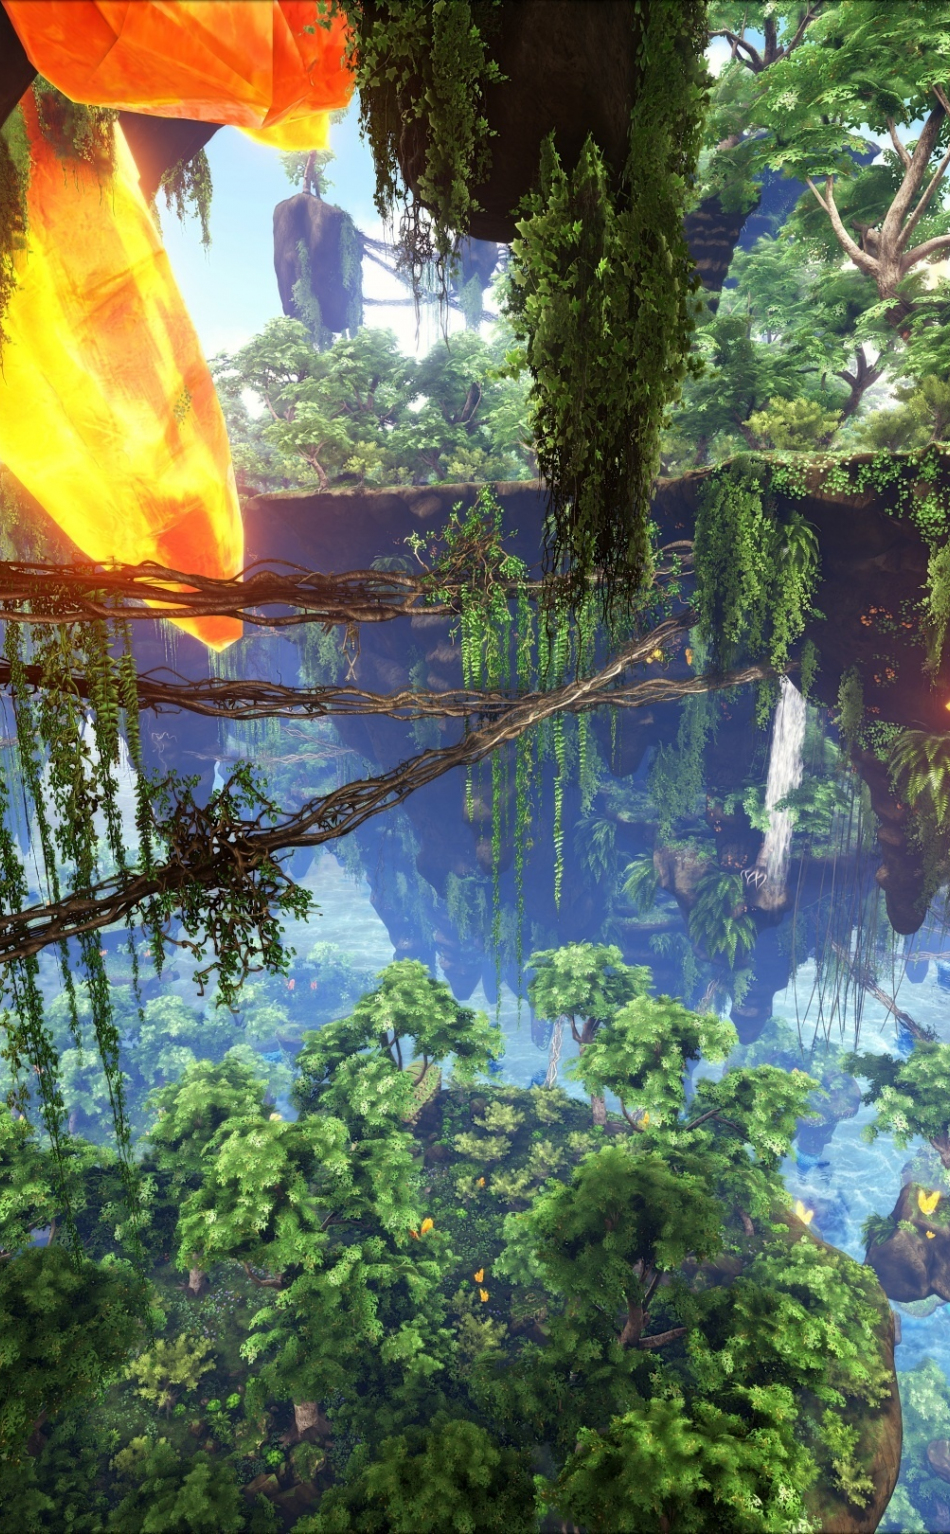 download 950x1534 wallpaper pandora nature ark survival evolved game iphone 950x1534 hd image background 4692